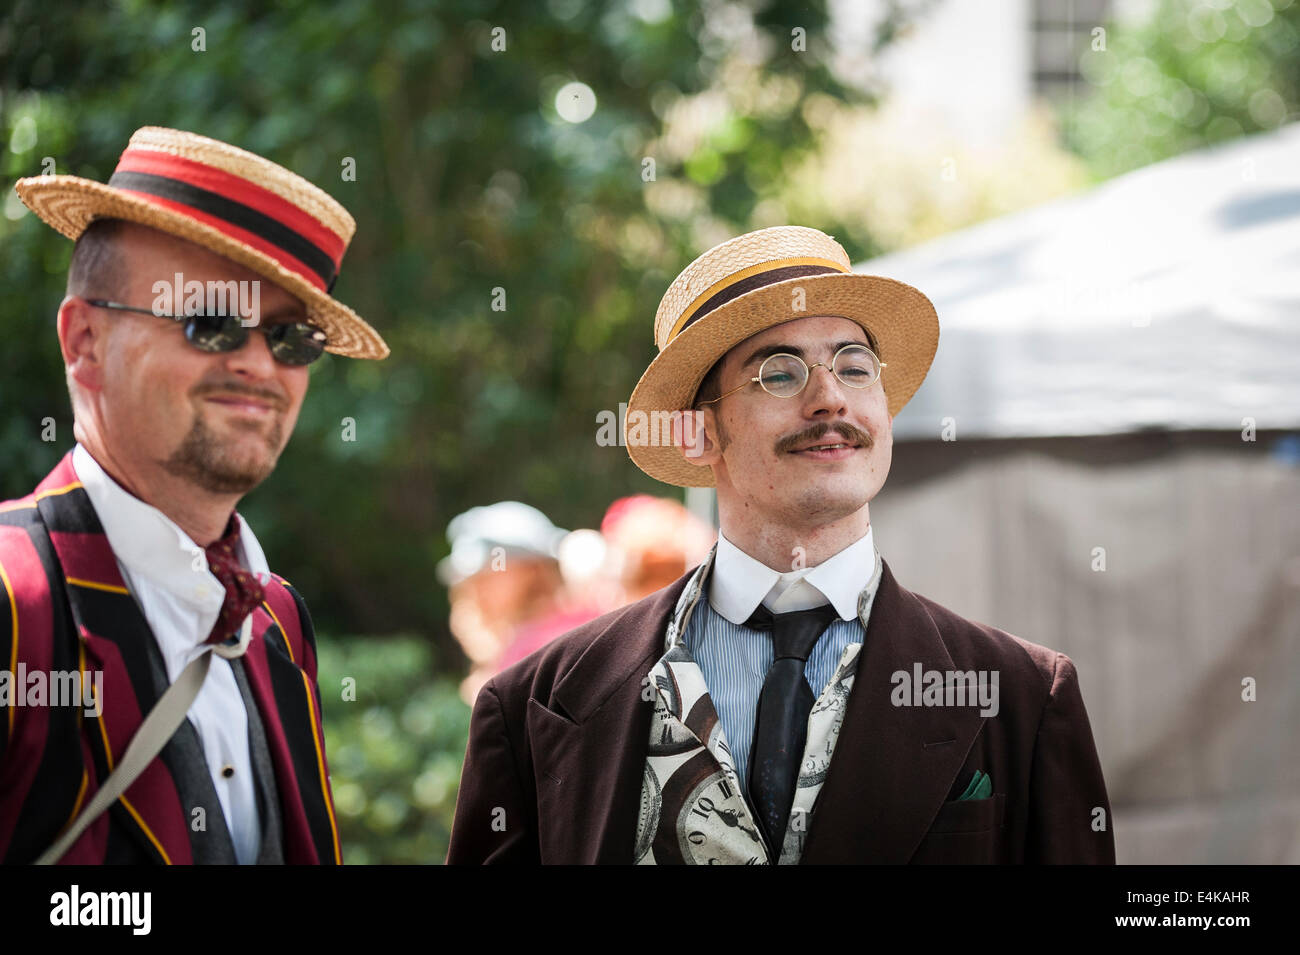 Chaps enjoying themselves at the Chap Olympiad. Stock Photo